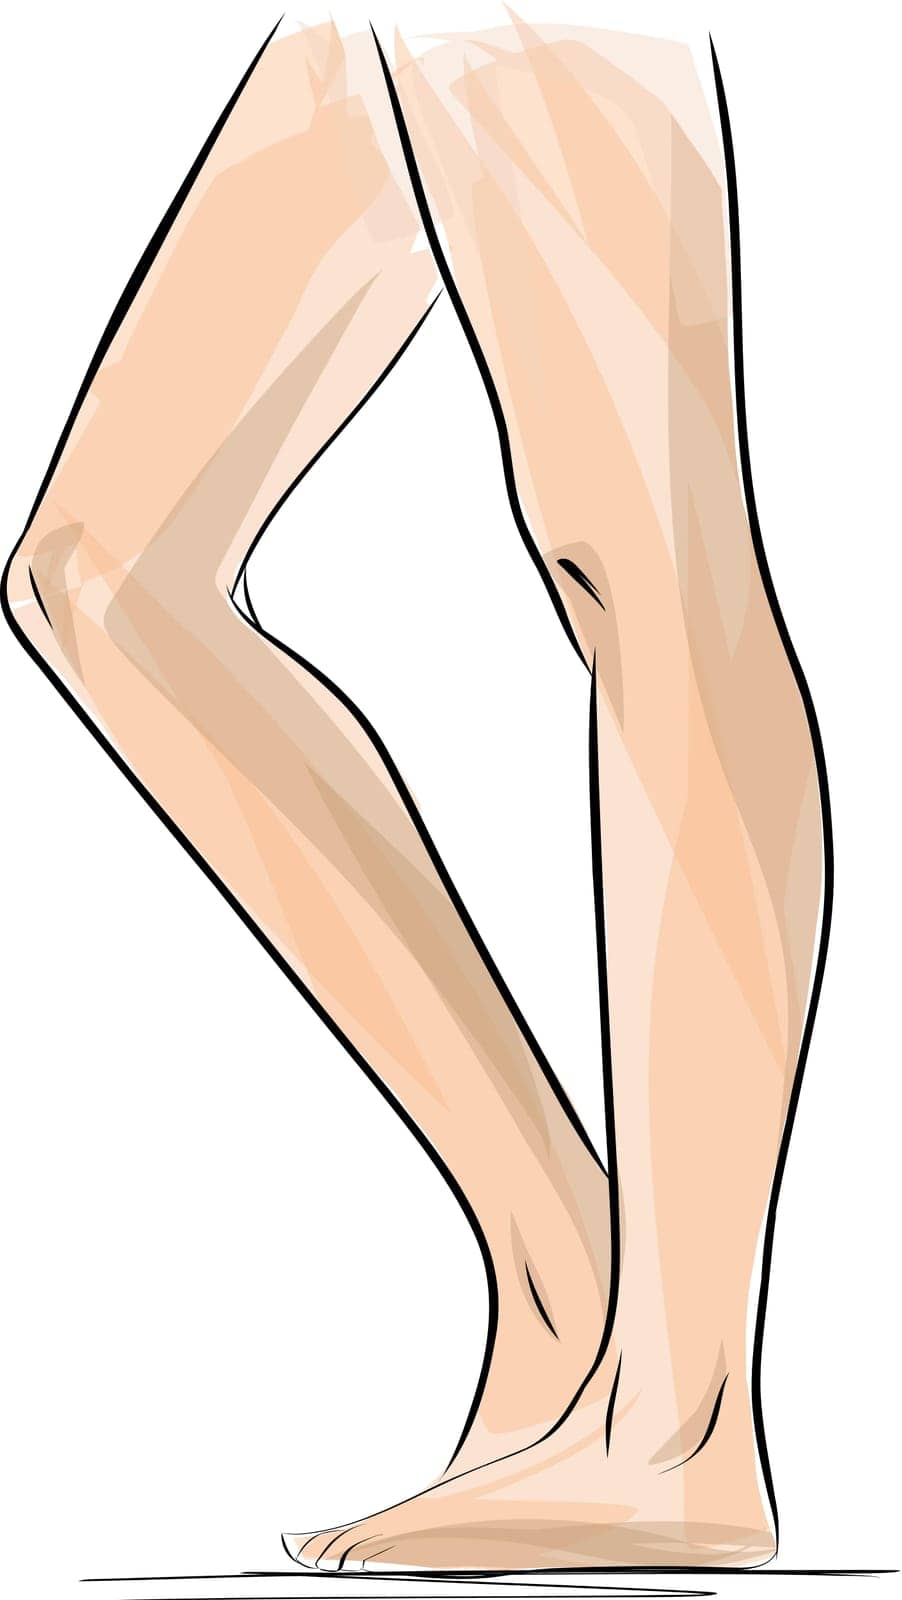 Silhouettes of lady legs and feet, Legs design elements. by aroas